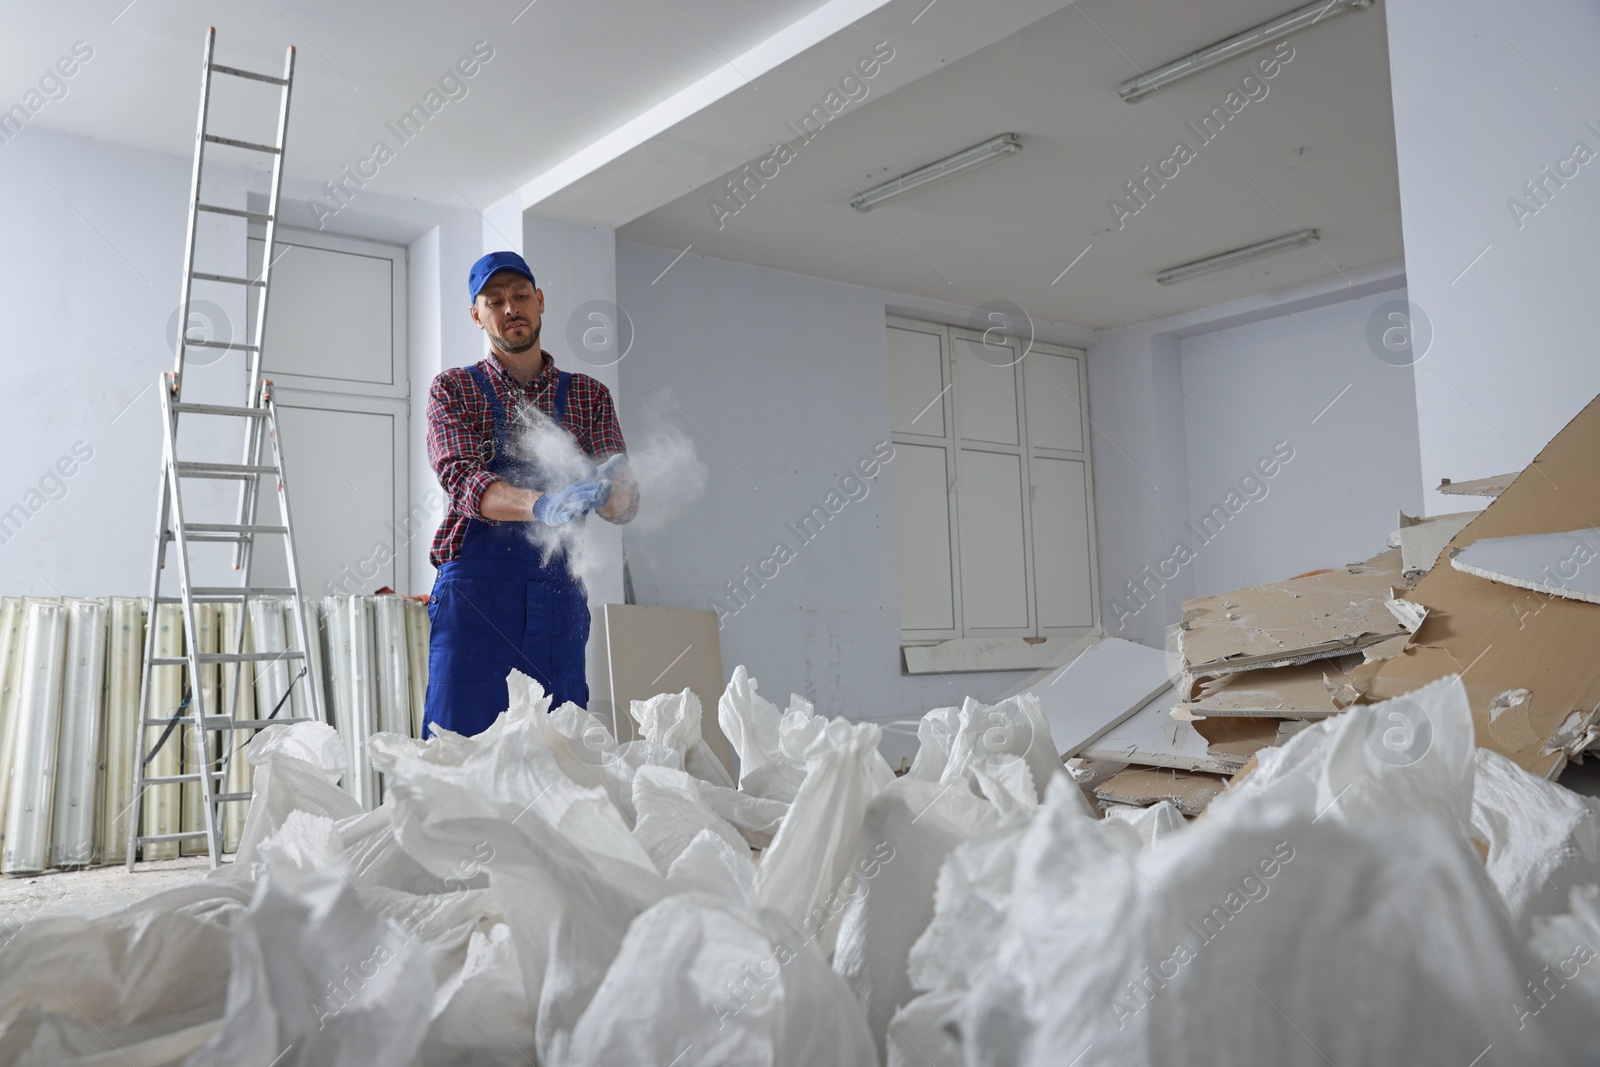 Photo of Construction worker shaking off dust from hands in room prepared for renovation